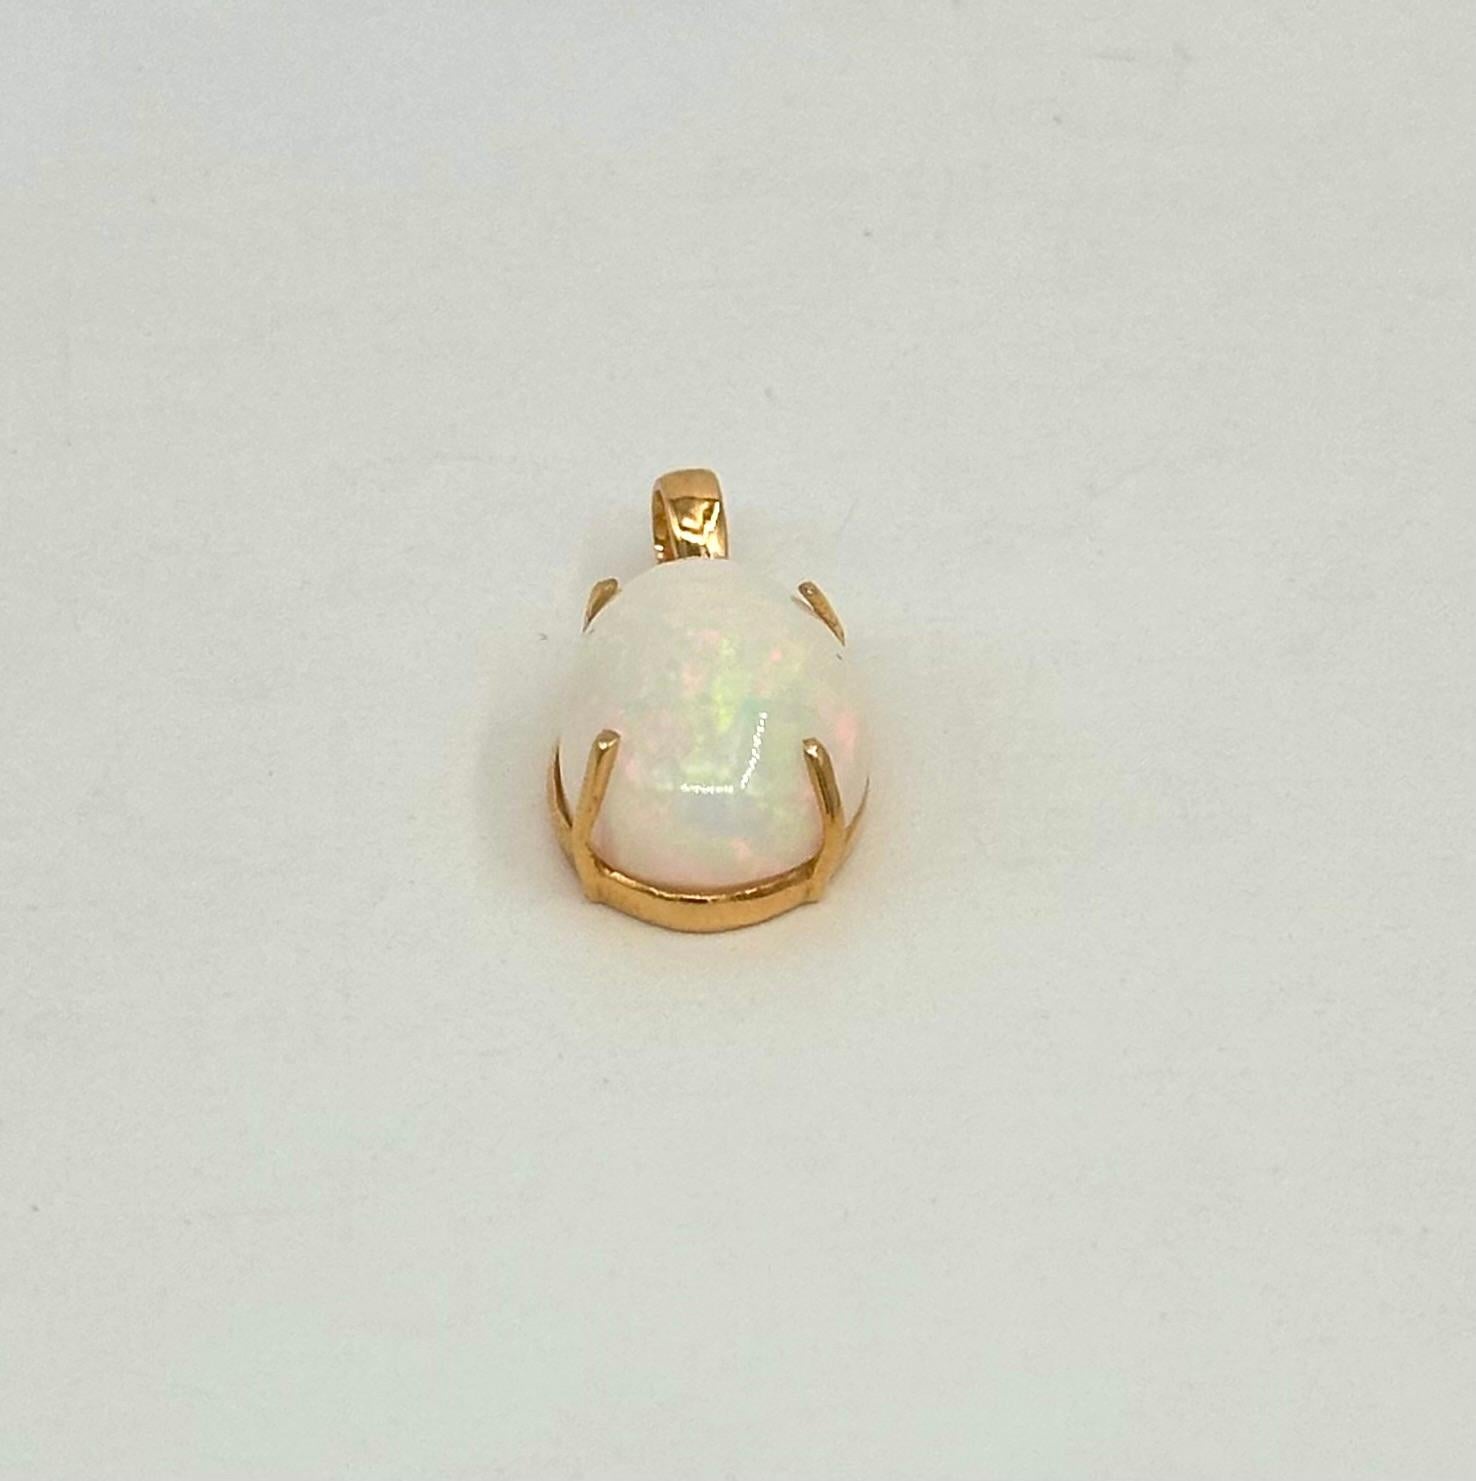 12.62ct Ethiopian opal stone in 14k yellow gold for pendant In New Condition For Sale In Delhi, DL